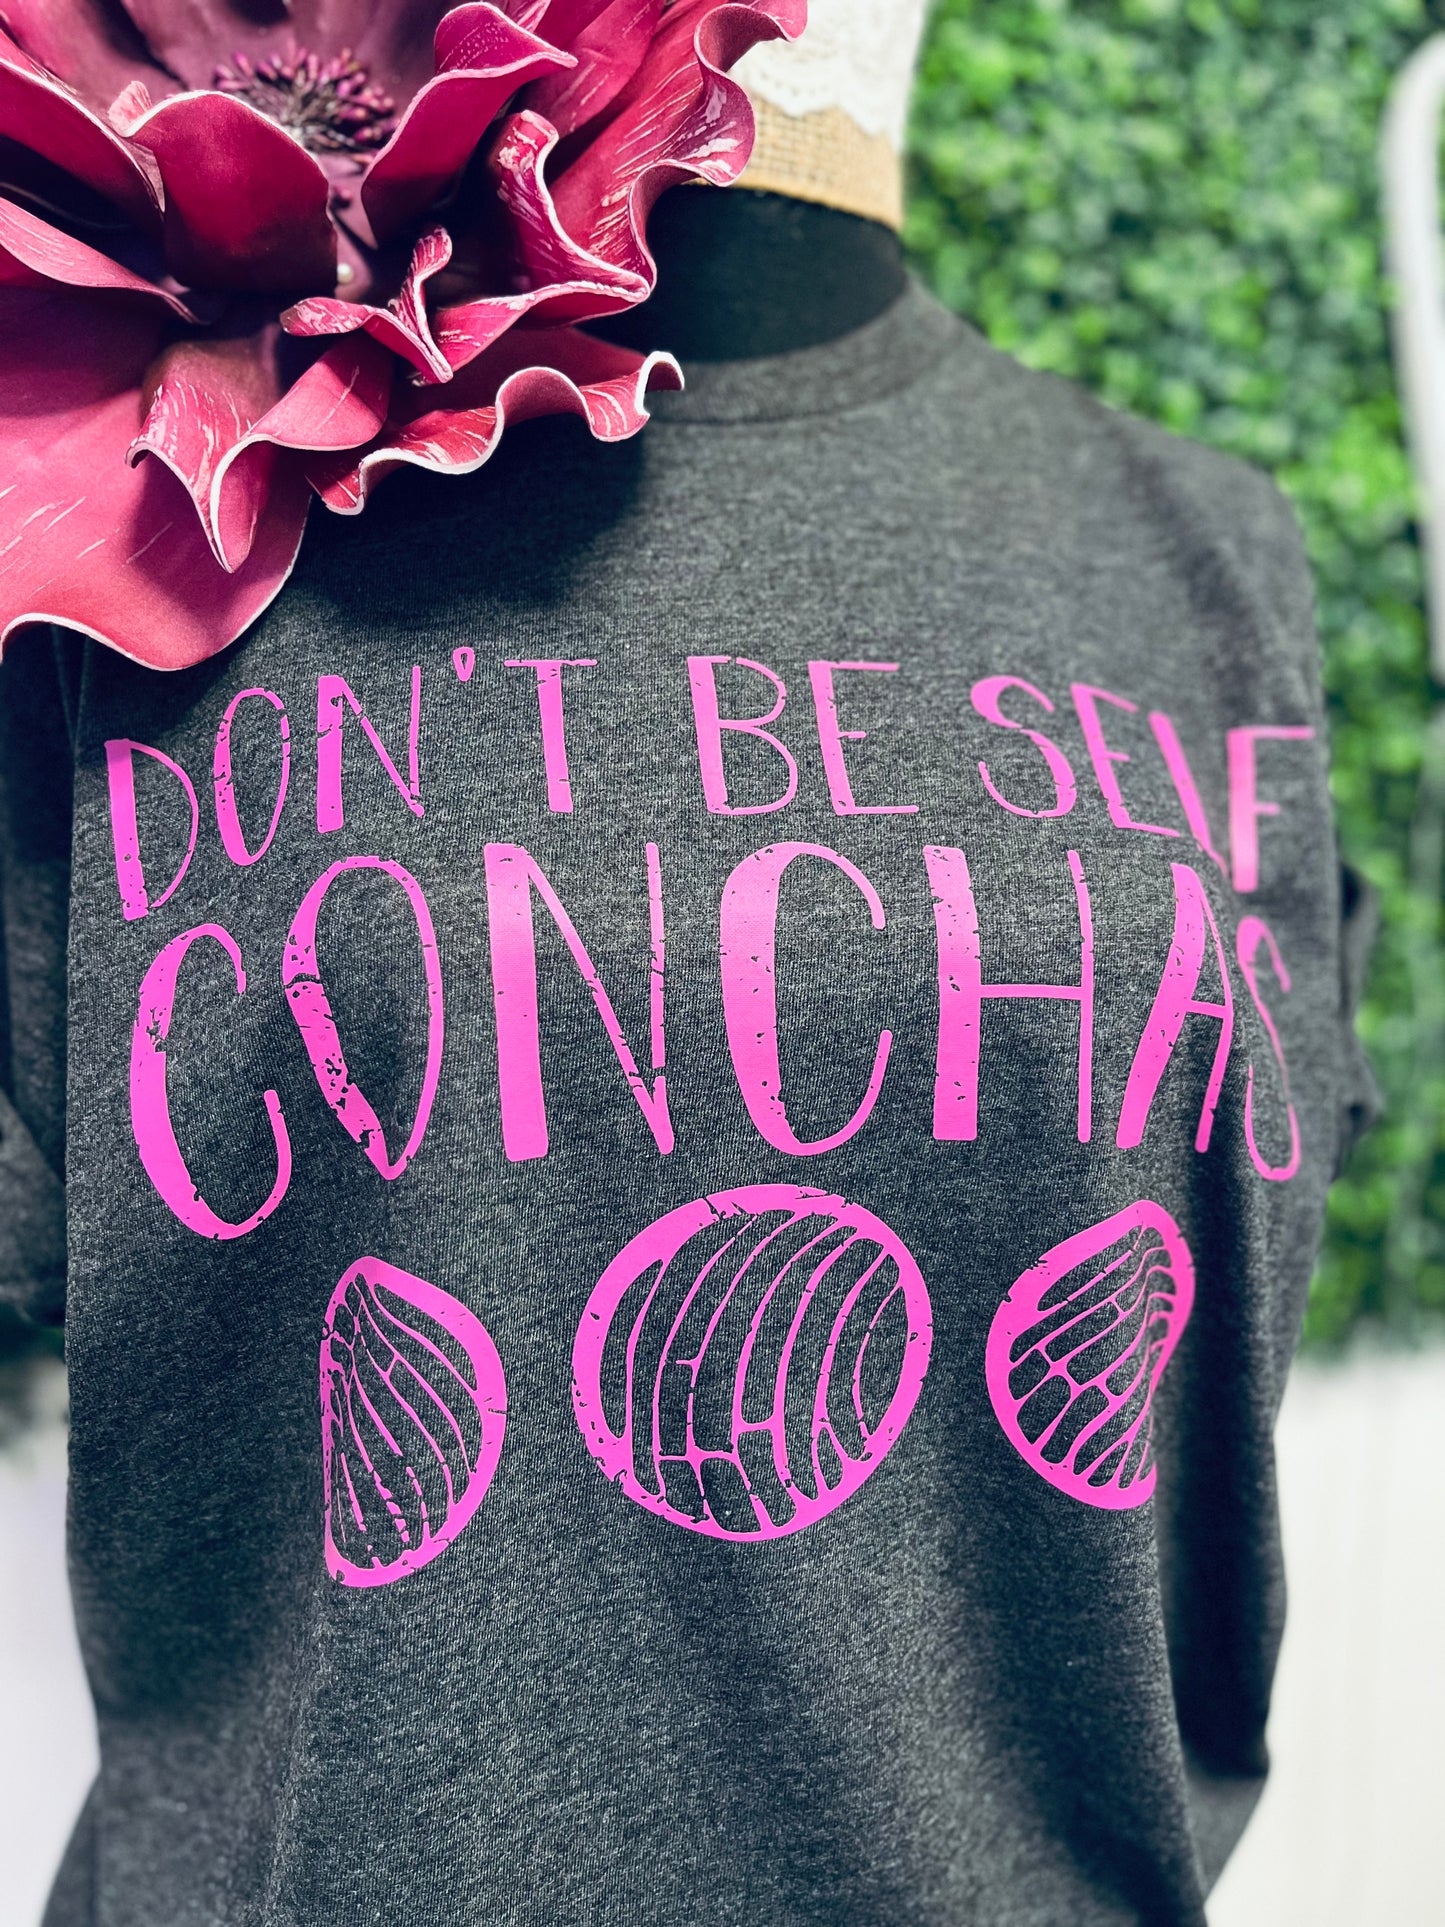 Don't Be Self Conchas tee